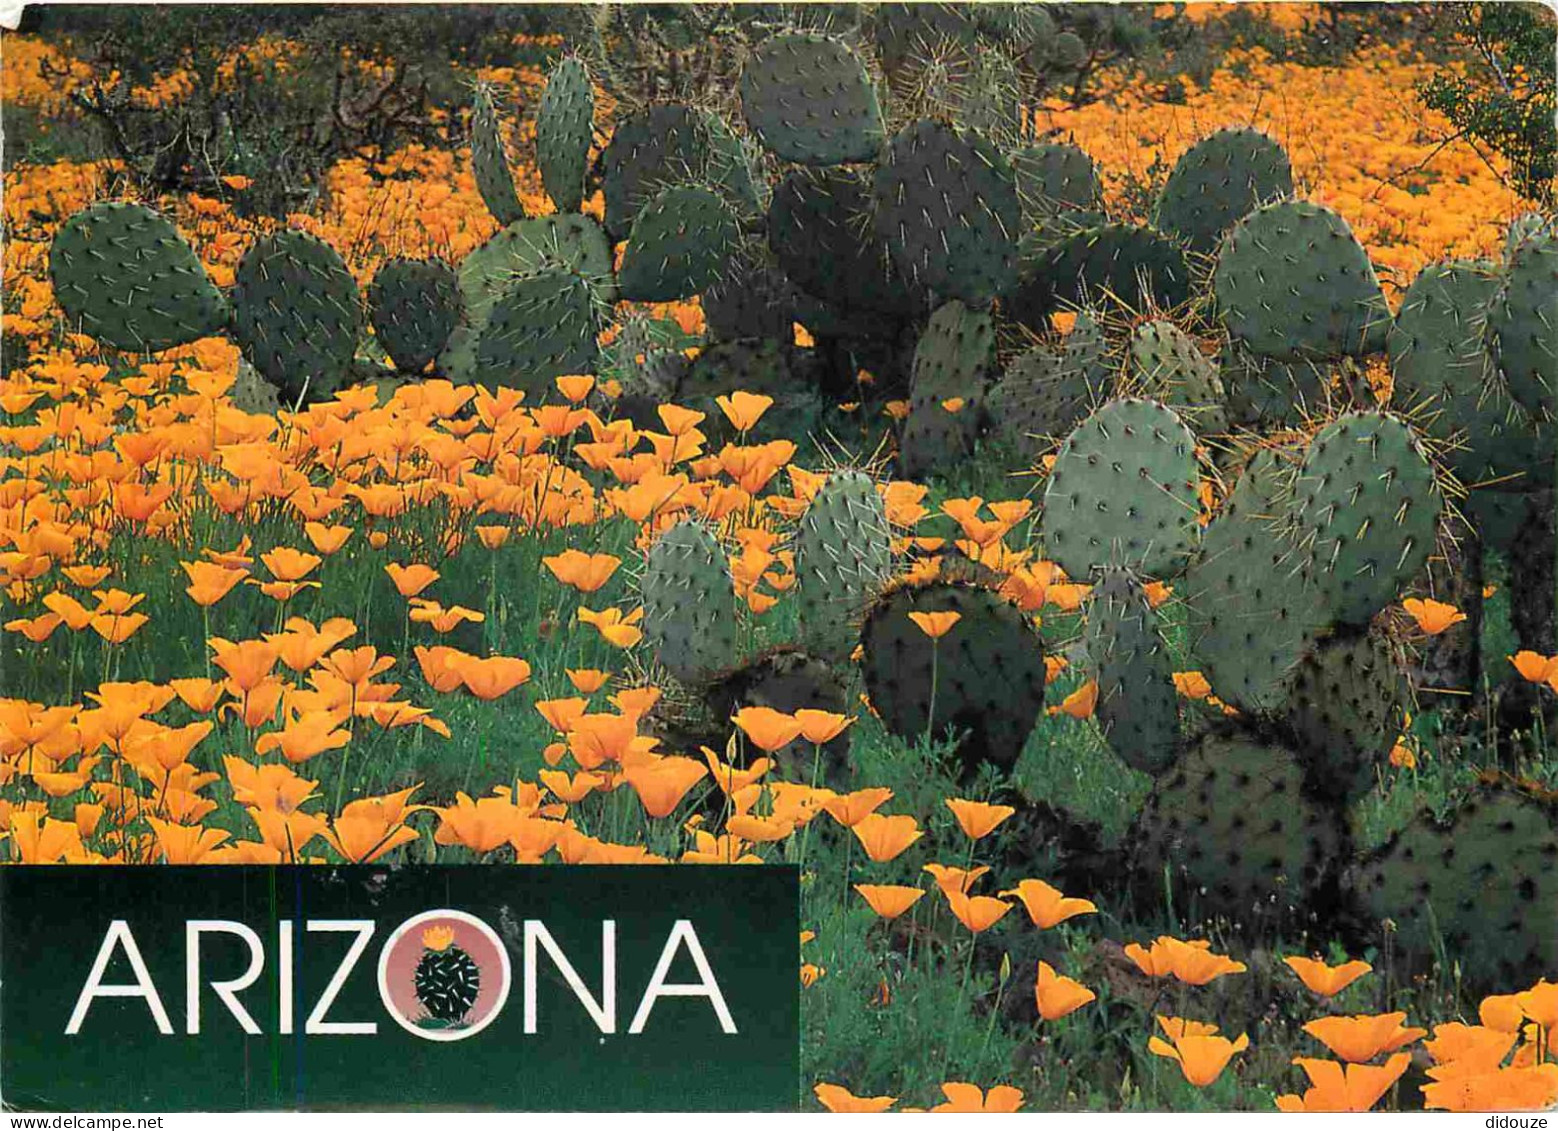 Fleurs - Plantes - Cactus - Arizona - A Blanket Of Mexican Goldpoppies Frame A Patch Ot Prickly Pear Cacti In Southern A - Cactusses